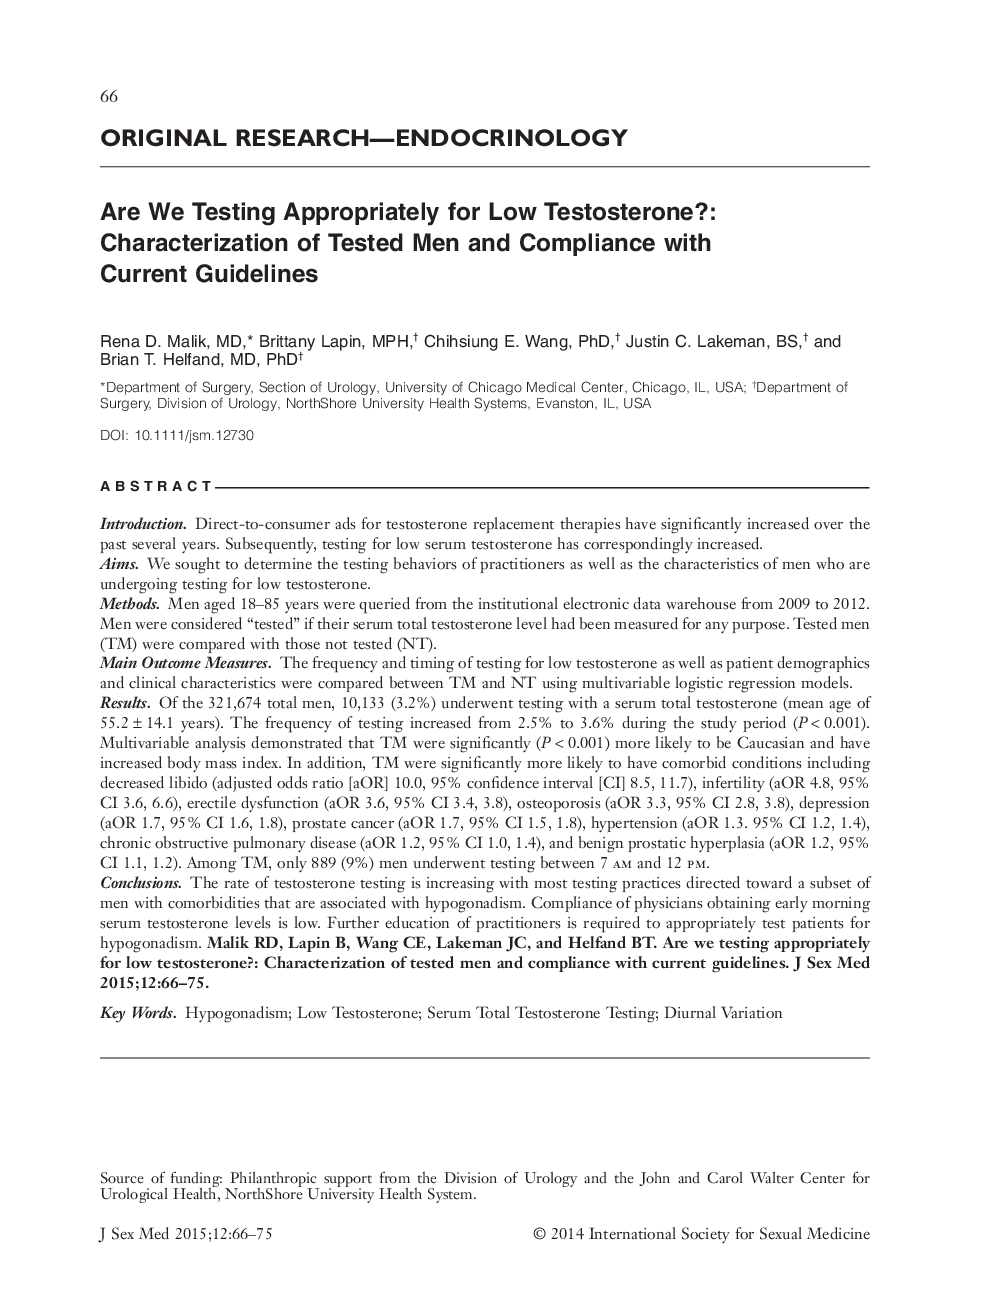 Are We Testing Appropriately for Low Testosterone?: Characterization of Tested Men and Compliance with Current Guidelines